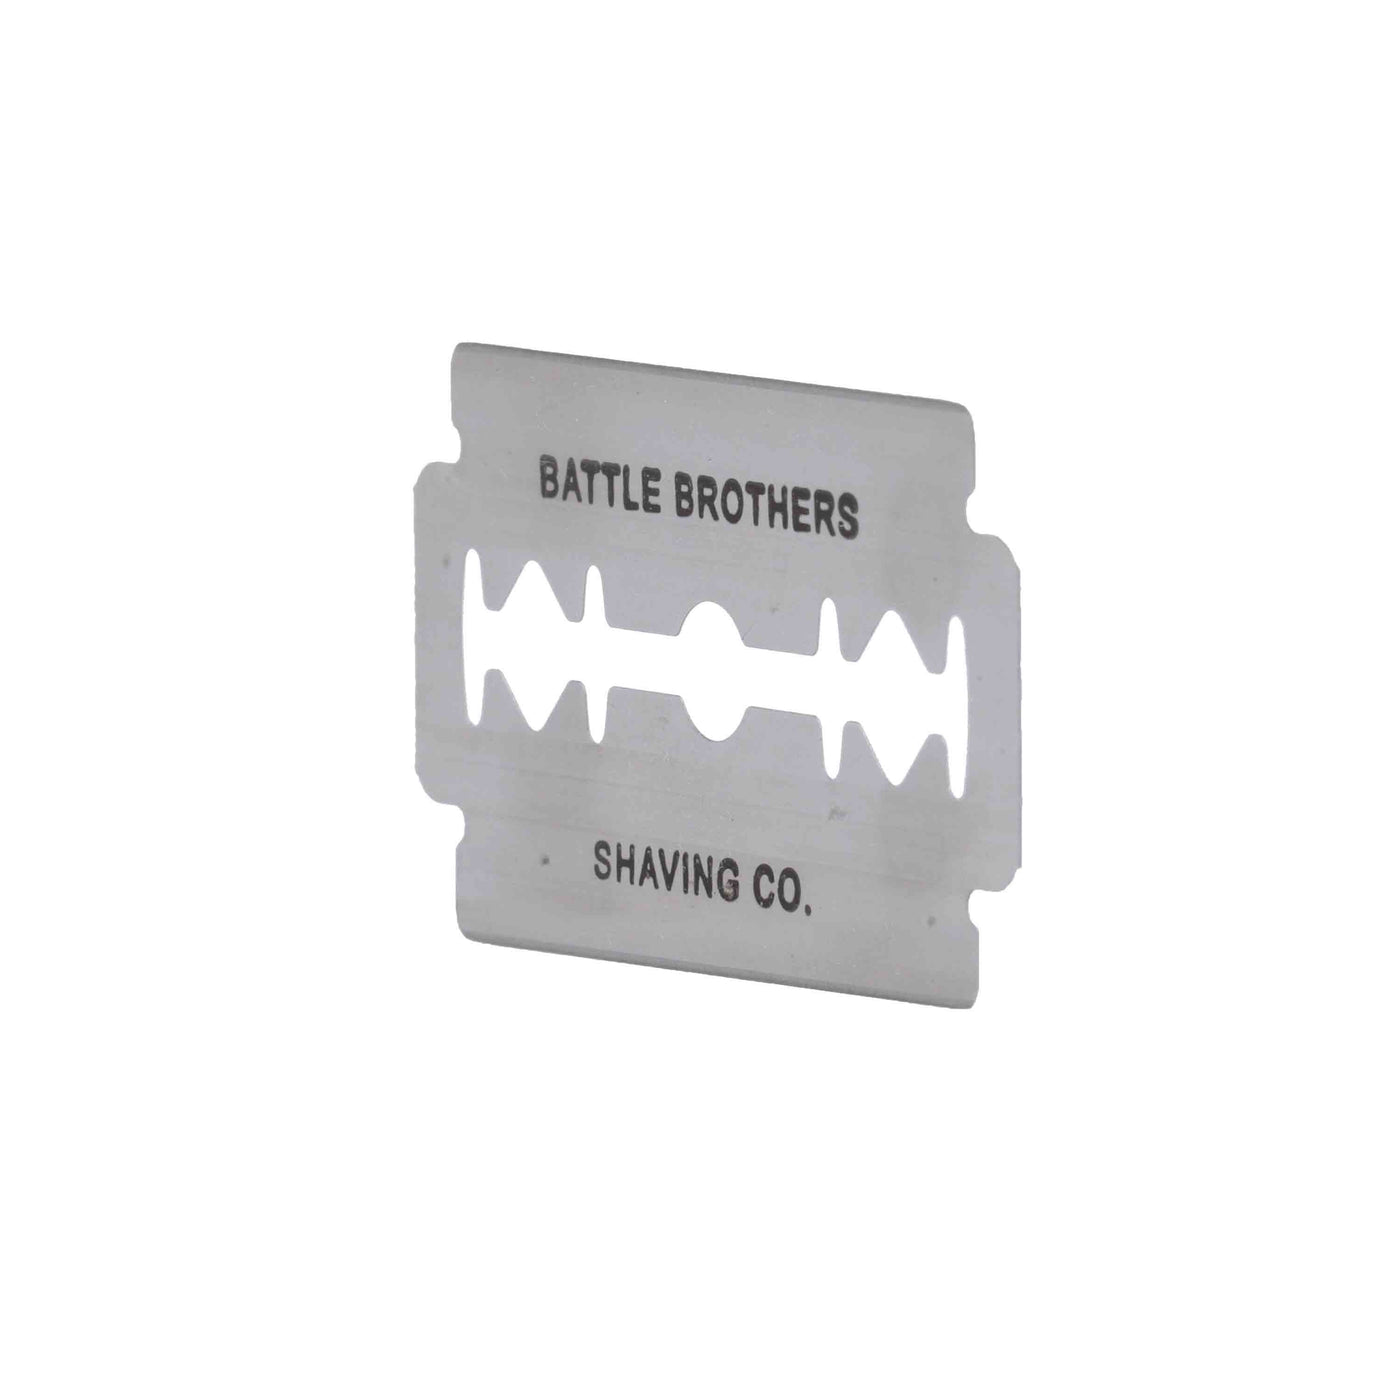 Double Edge Razor Blades by Battle Brothers Shaving Co.